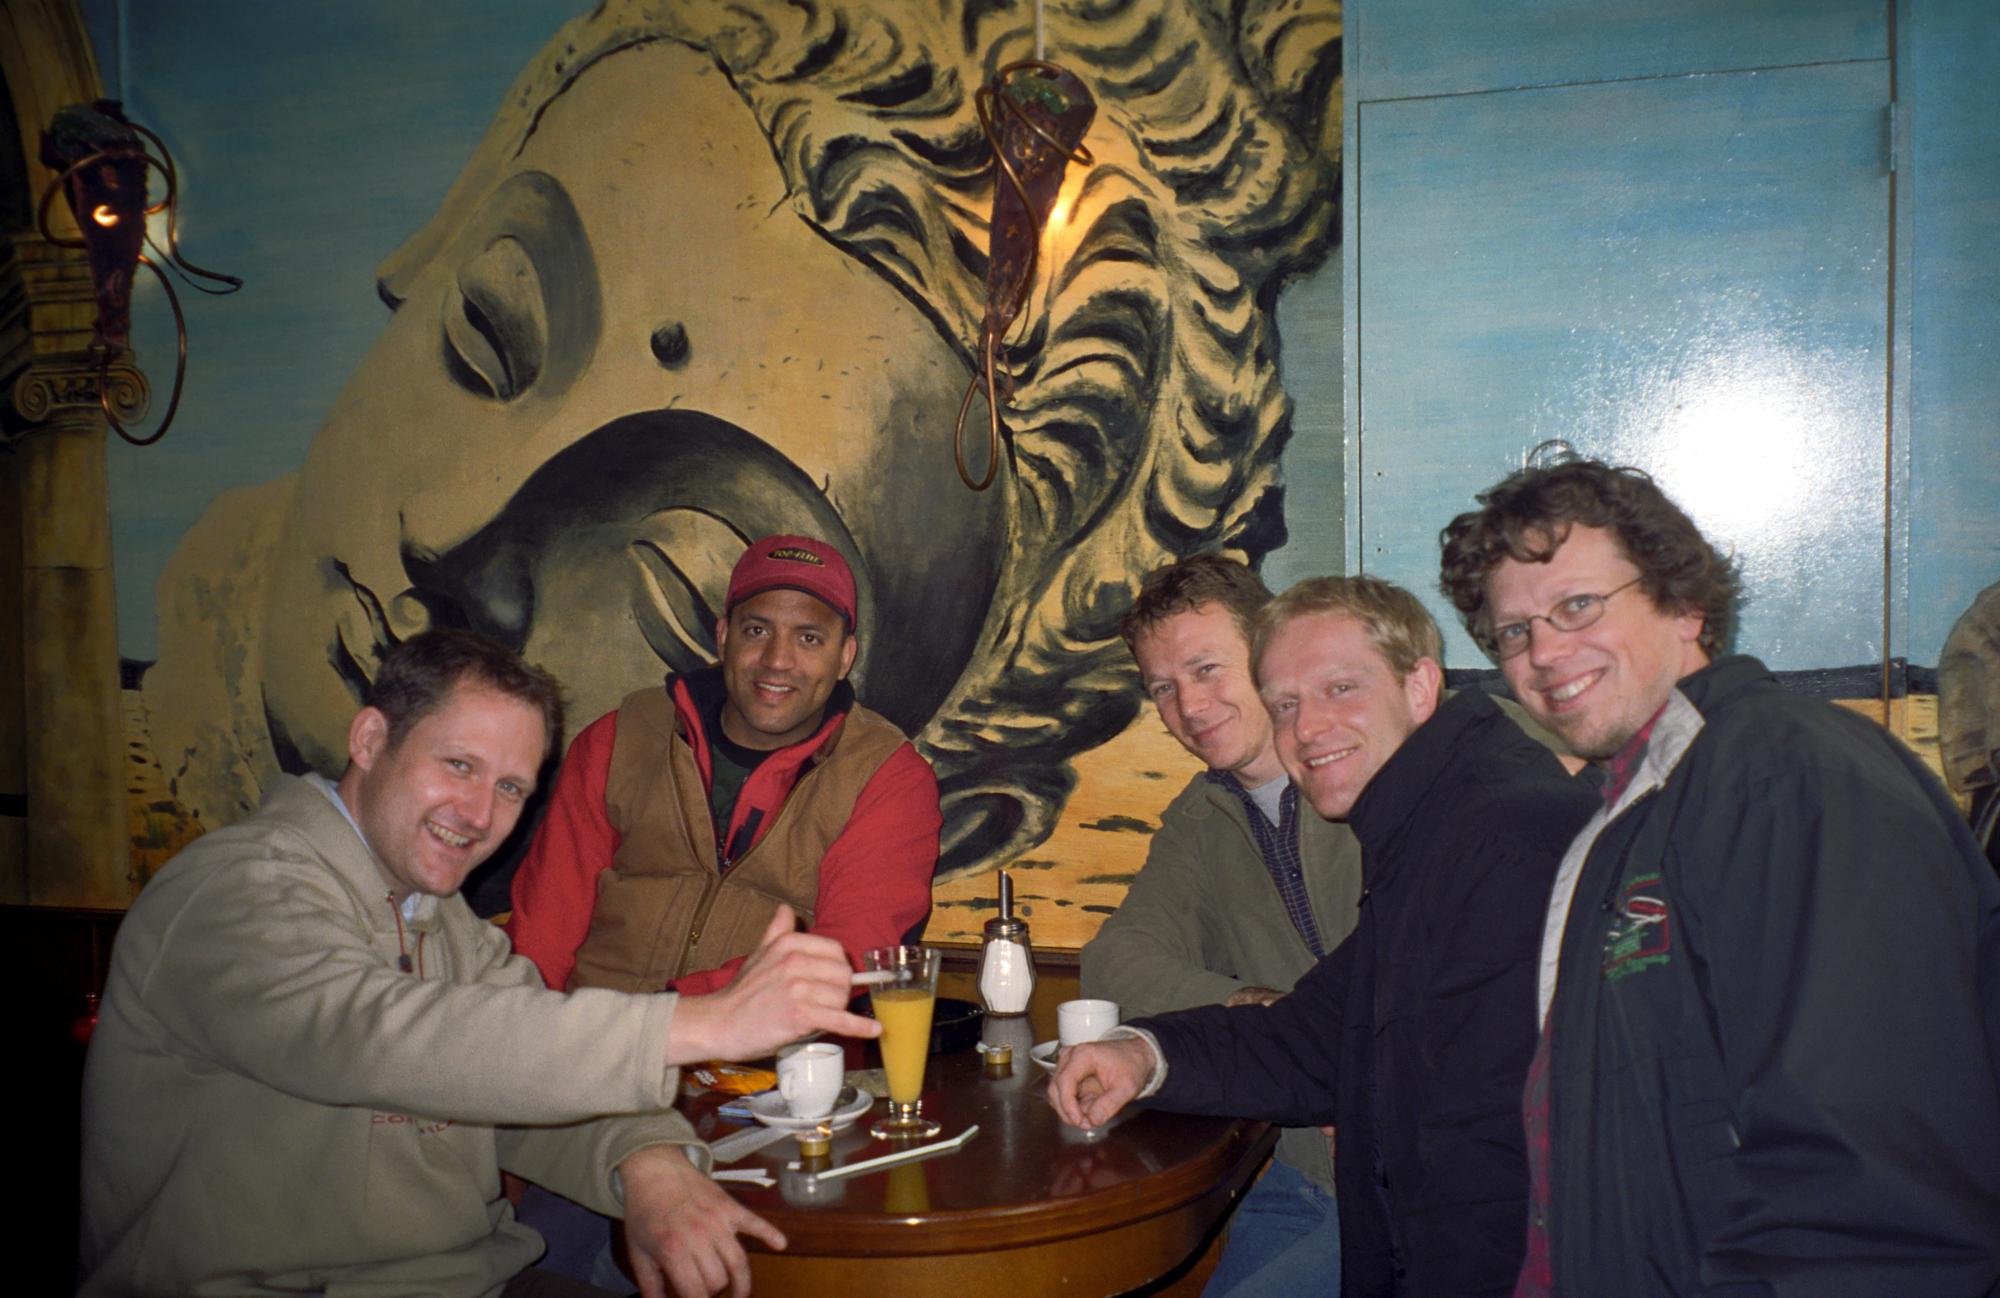 The Netherlands - Ulis Bachelor Party Amsterdam #3